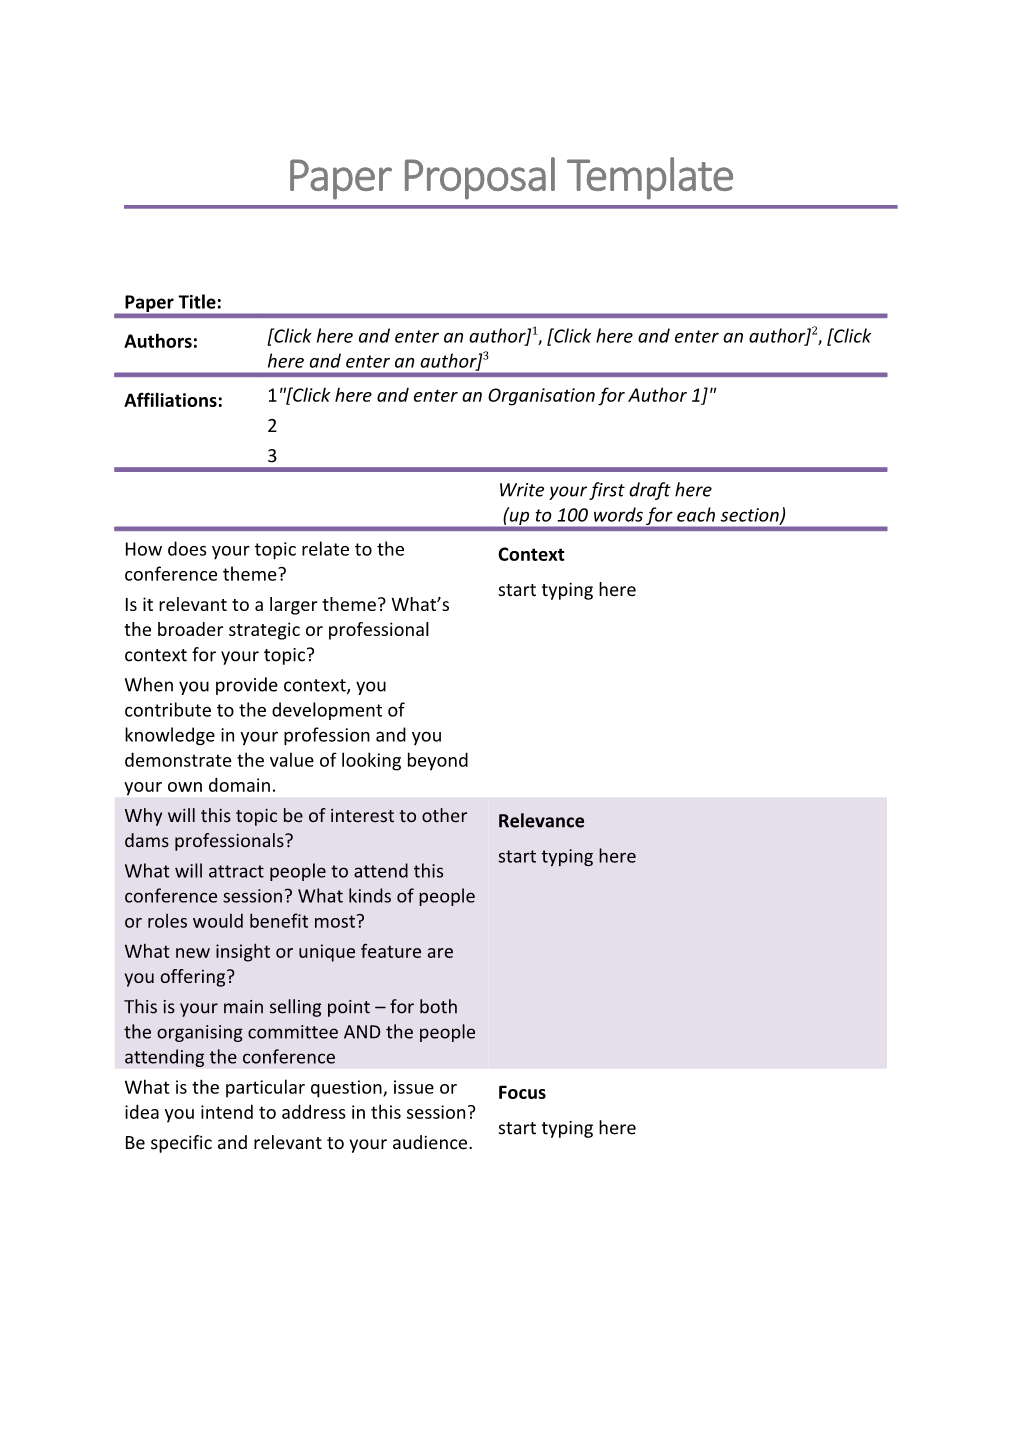 Paper Proposal Template